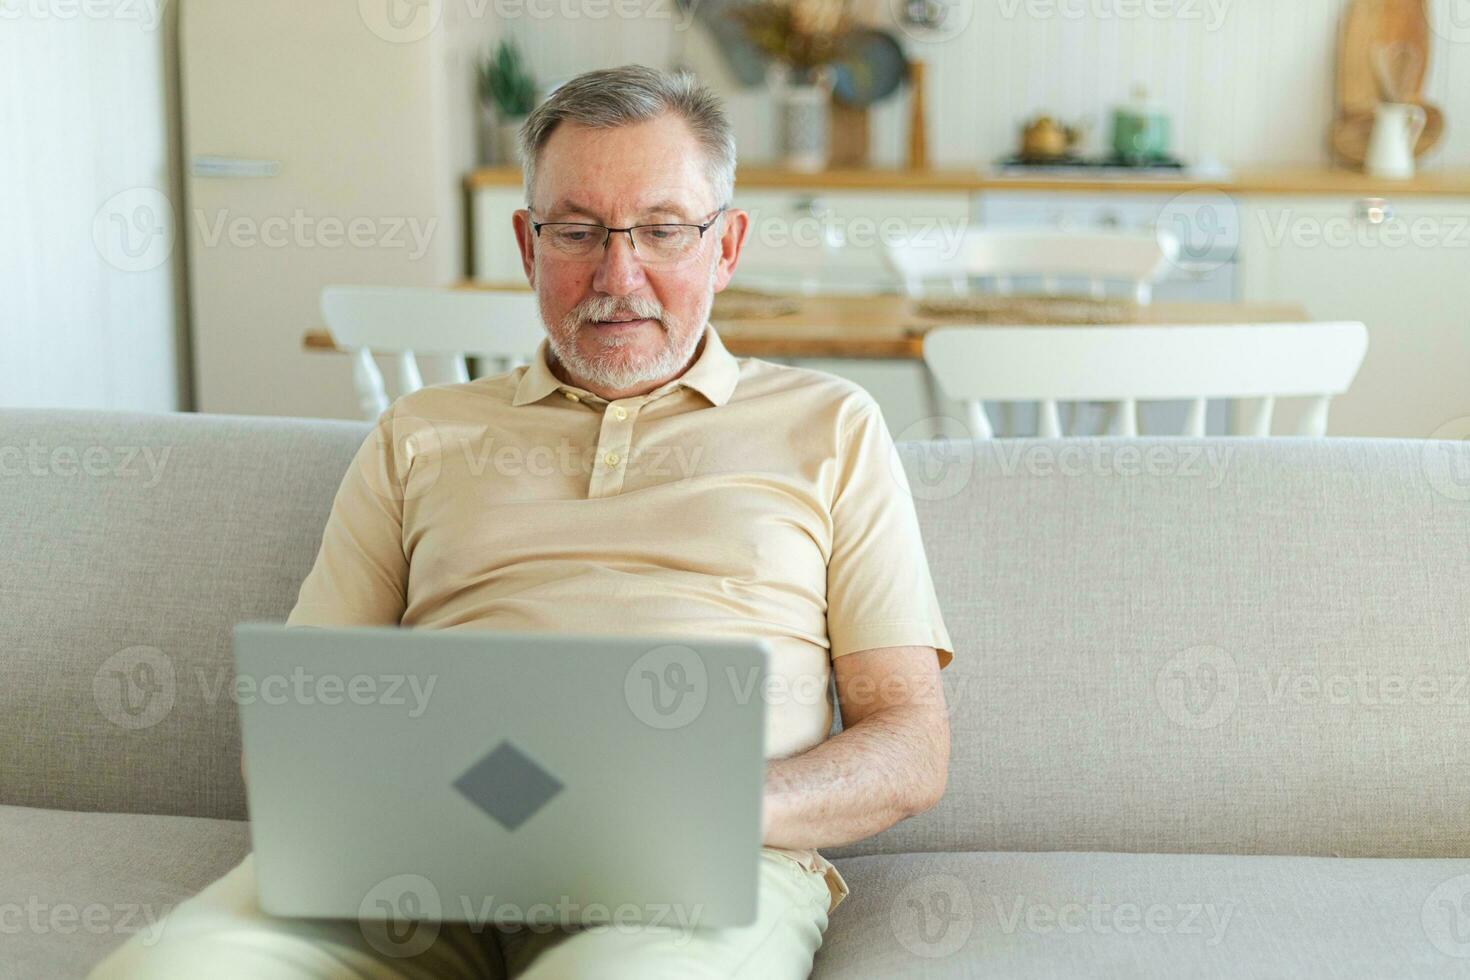 Confident stylish happy middle aged senior man using laptop at home. Stylish older mature 60s beard grandfather sitting at couch looking at computer screen typing chatting reading writing email. photo